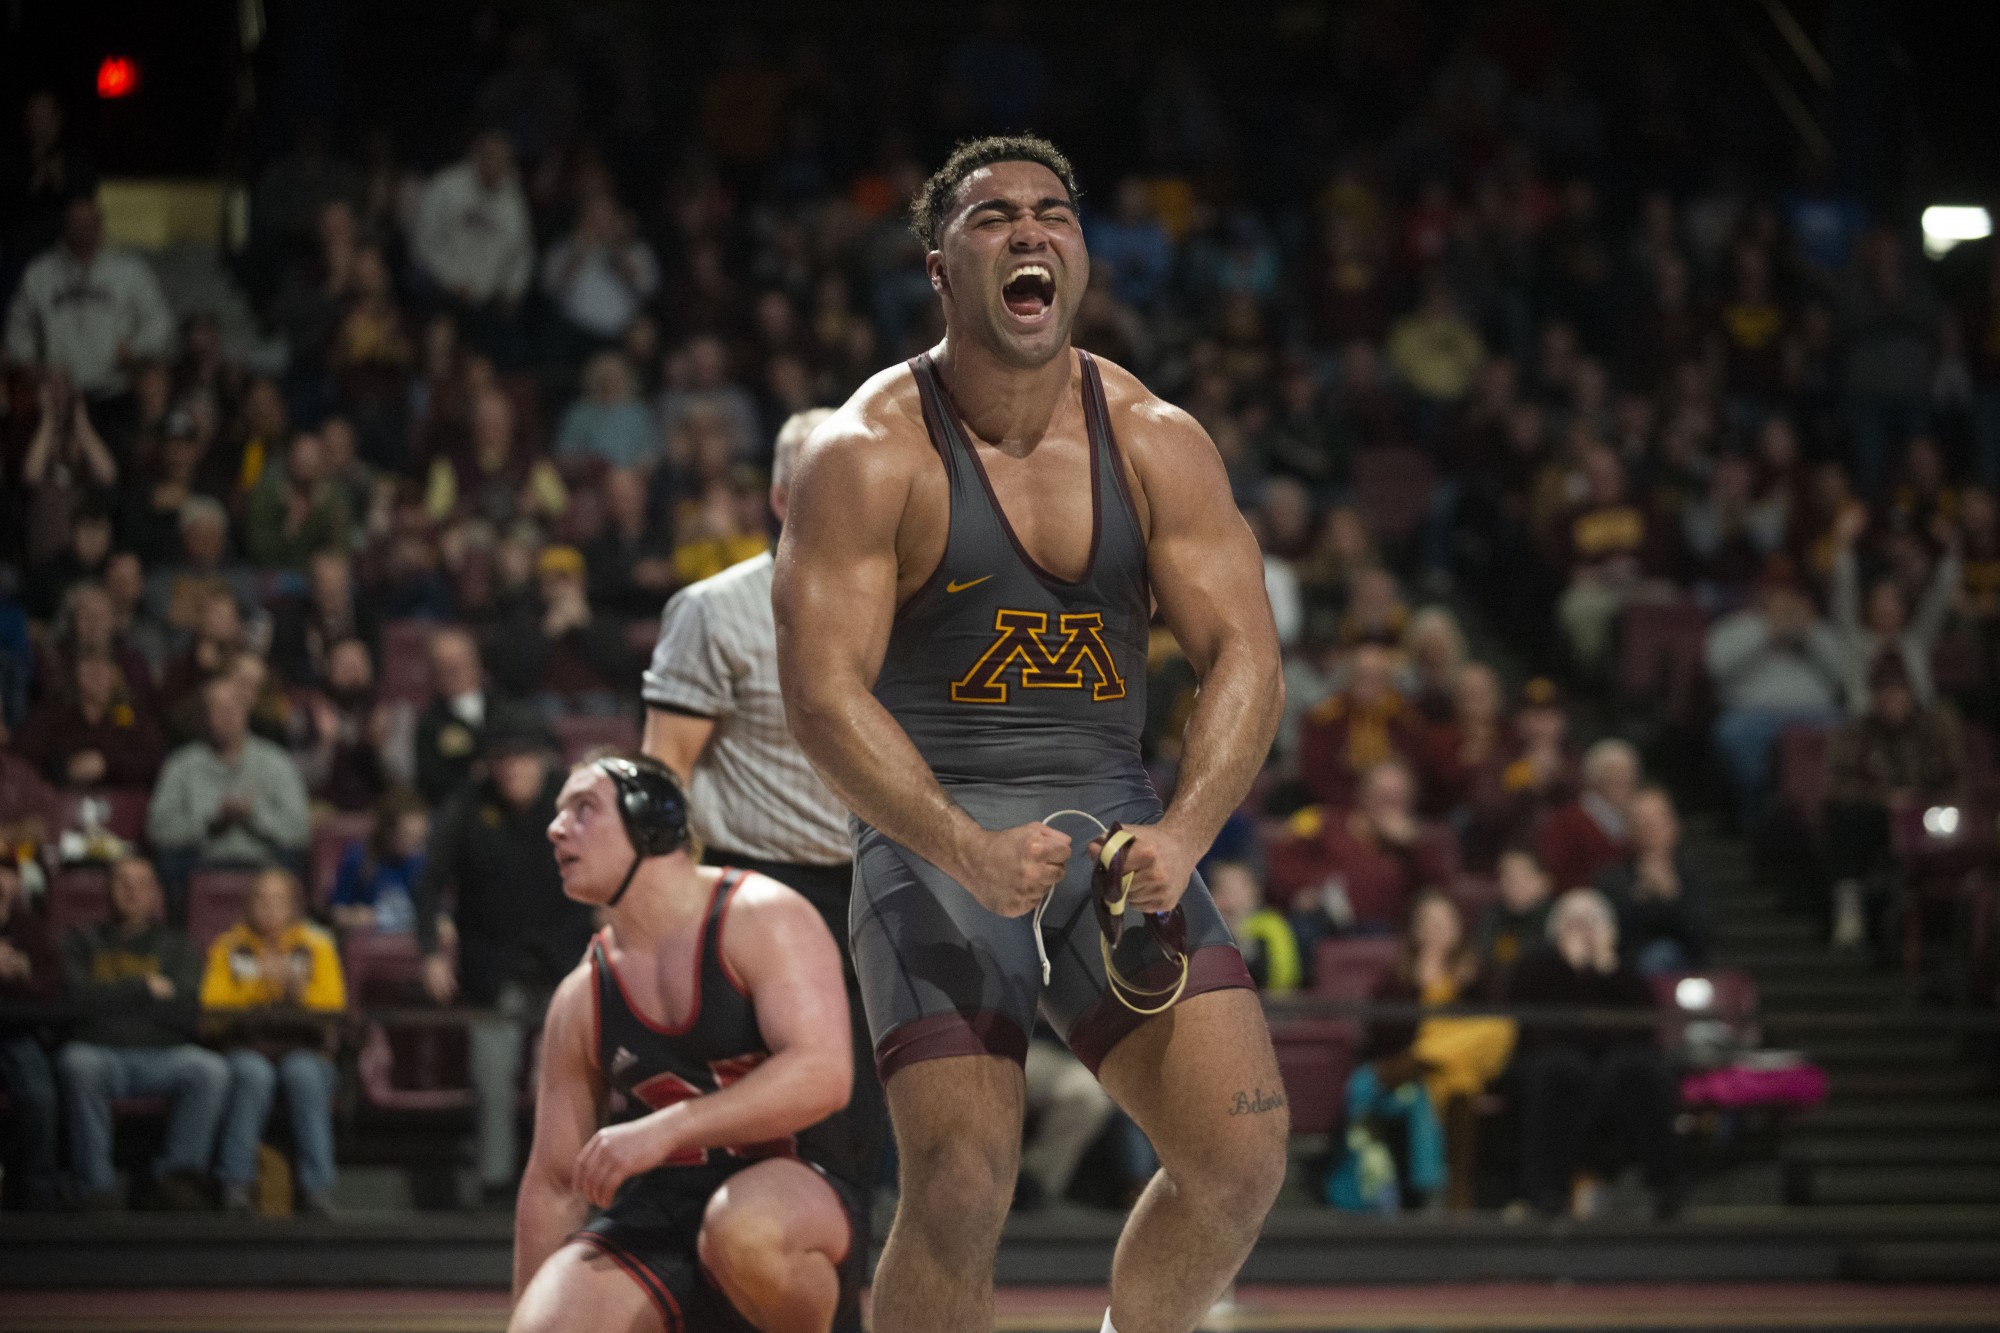 Sophomore Gable Steveson celebrates after a winning a match during the meet against Nebraska at the Maturi Pavilion on Friday, Feb. 21. 